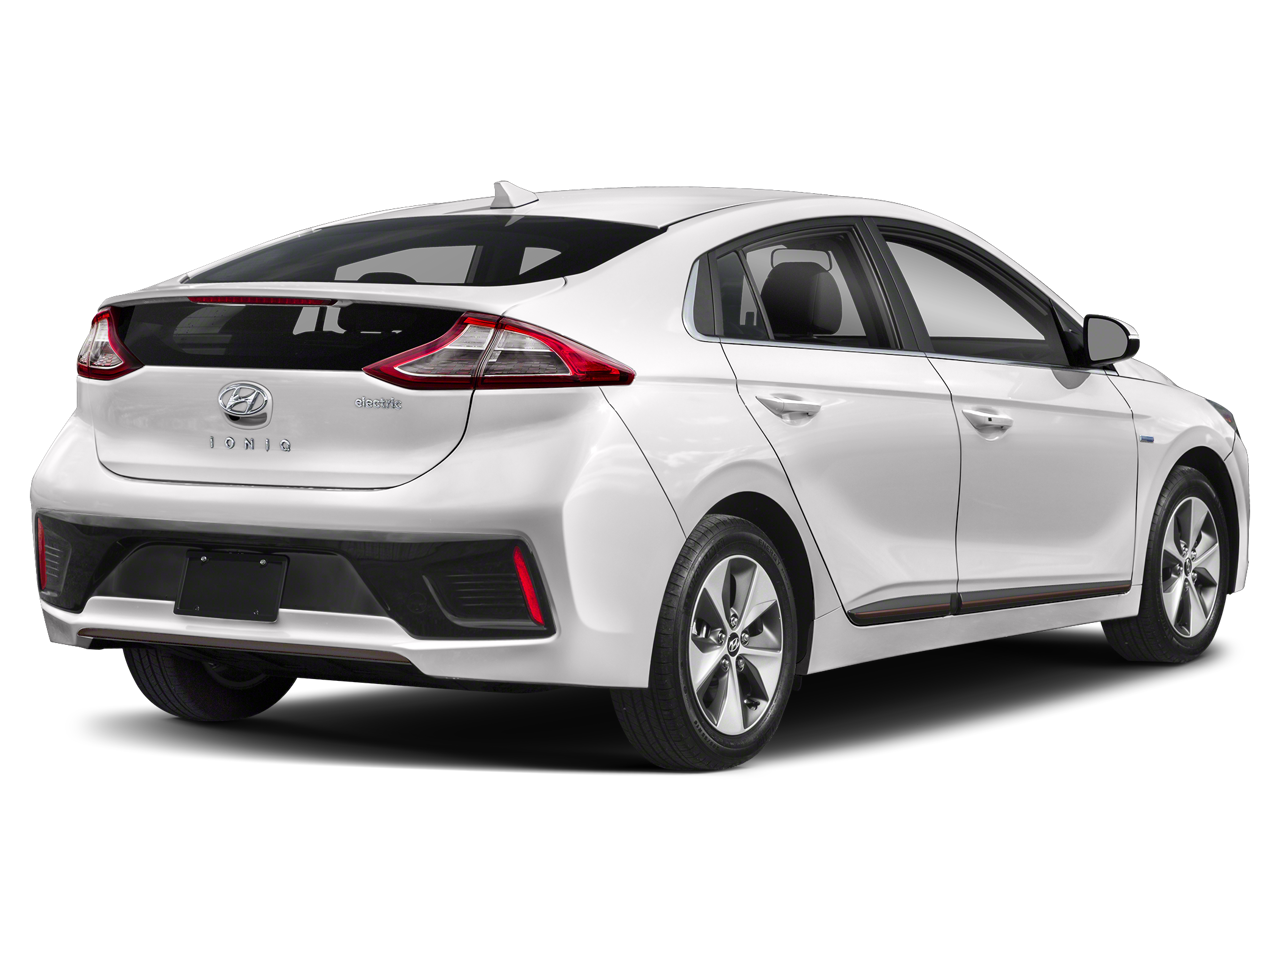 Used 2019 Hyundai Ioniq Limited with VIN KMHC05LH1KU045337 for sale in Lewis Center, OH